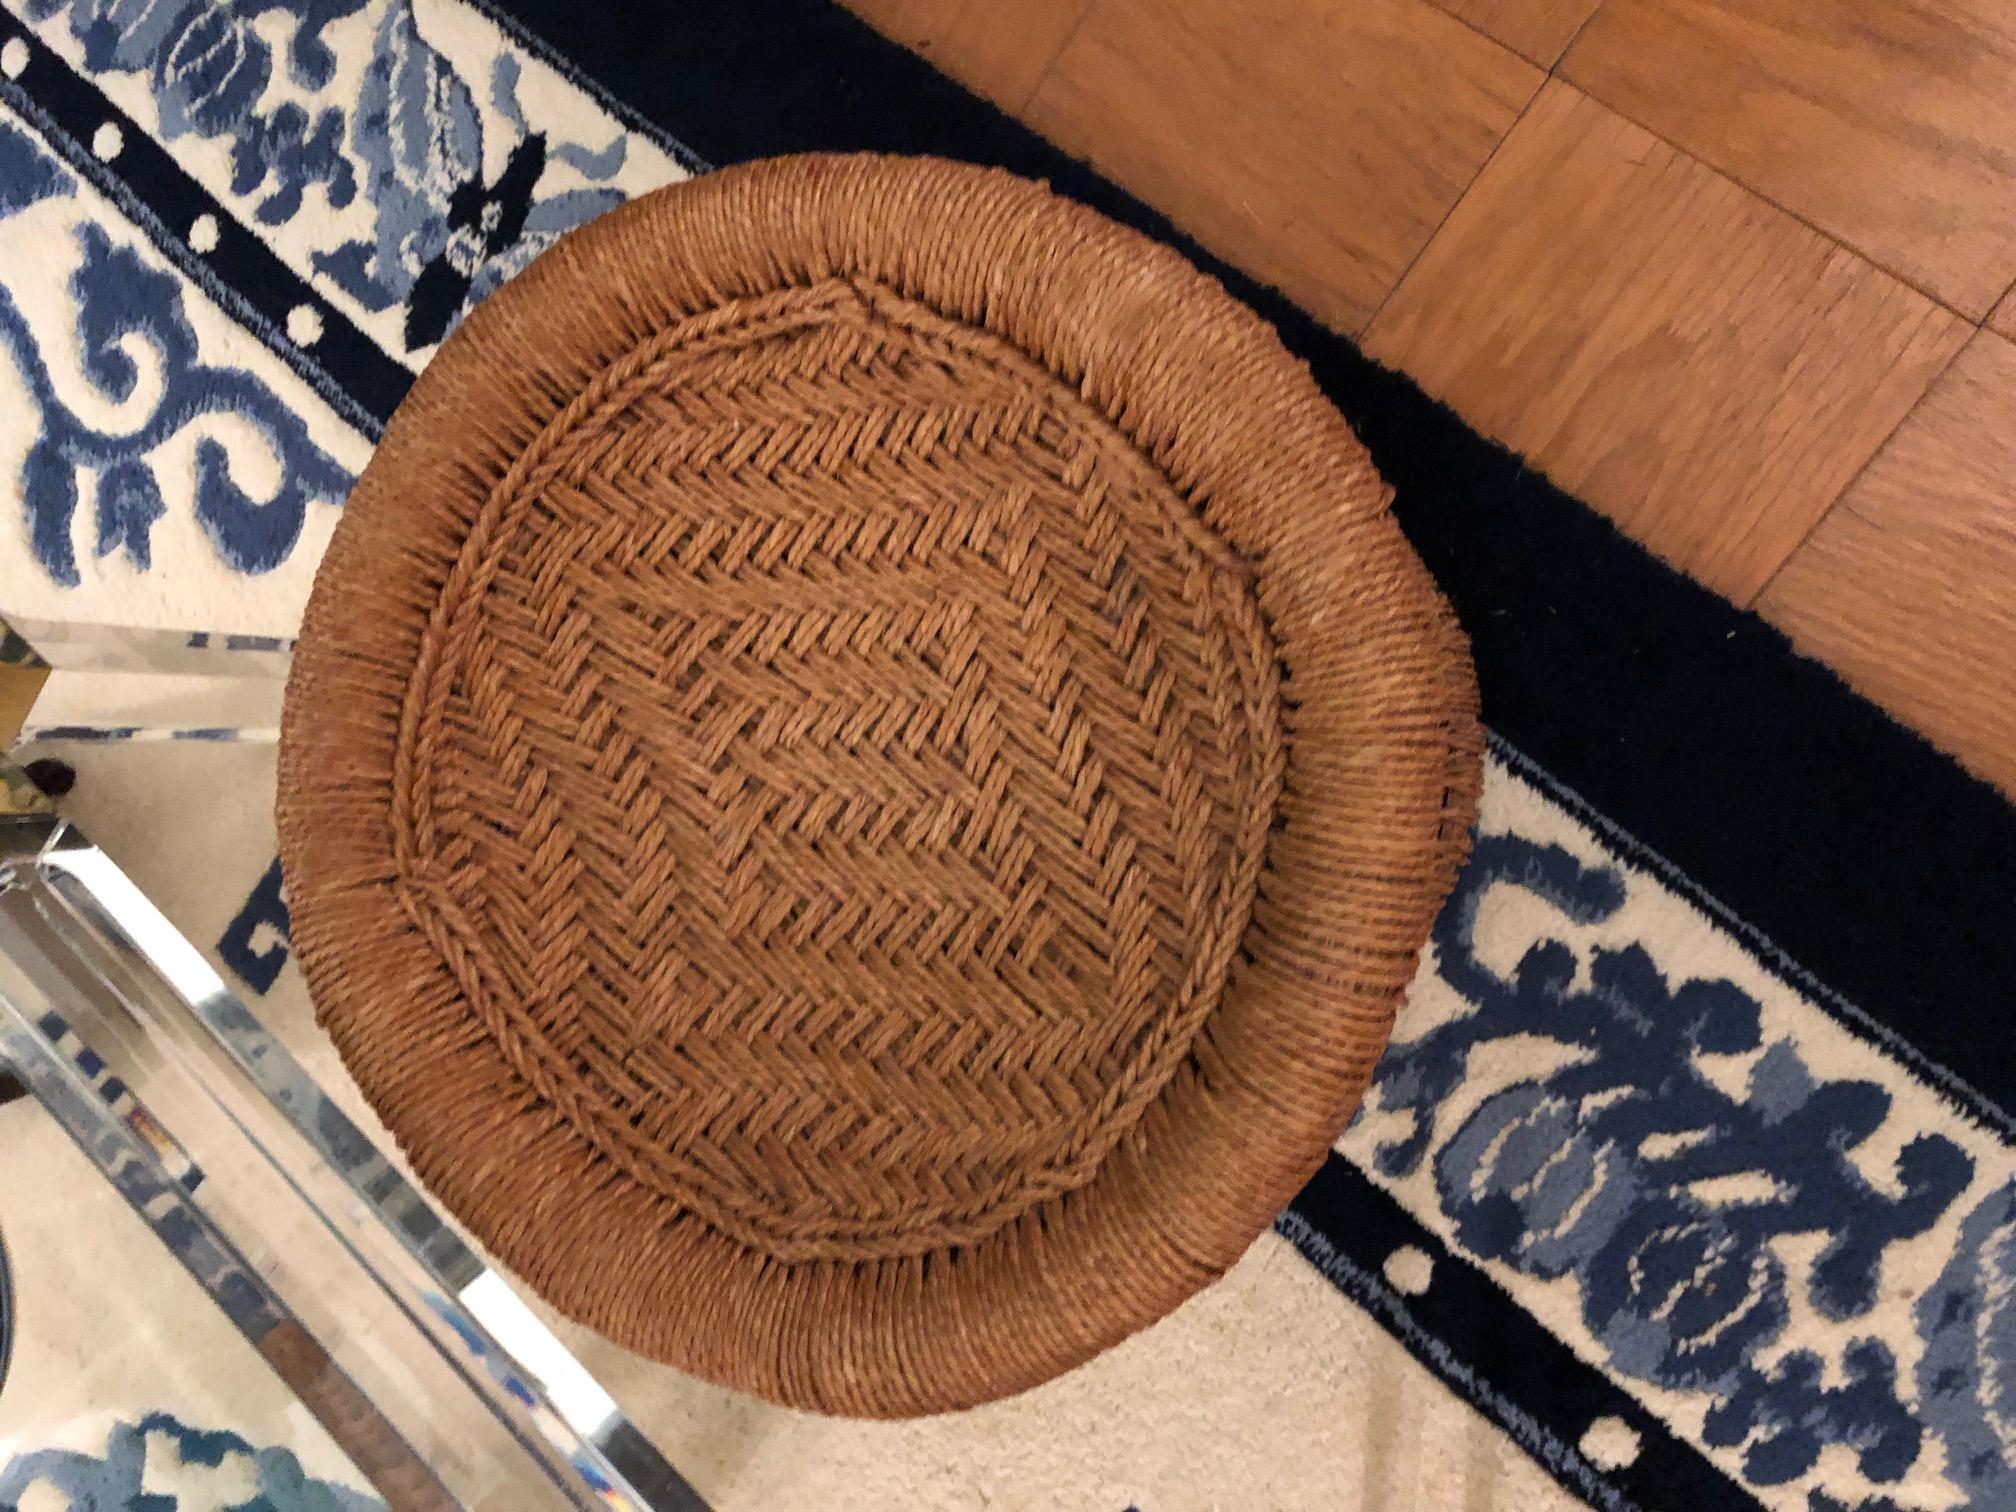 Sturdy and handsome natural reed body with woven rush top and accents stool, popularized by California craftsmen in the 1960s-1970s. Note the basket weave motif in the top woven area. With the addition of a round glass top, the stool could easily